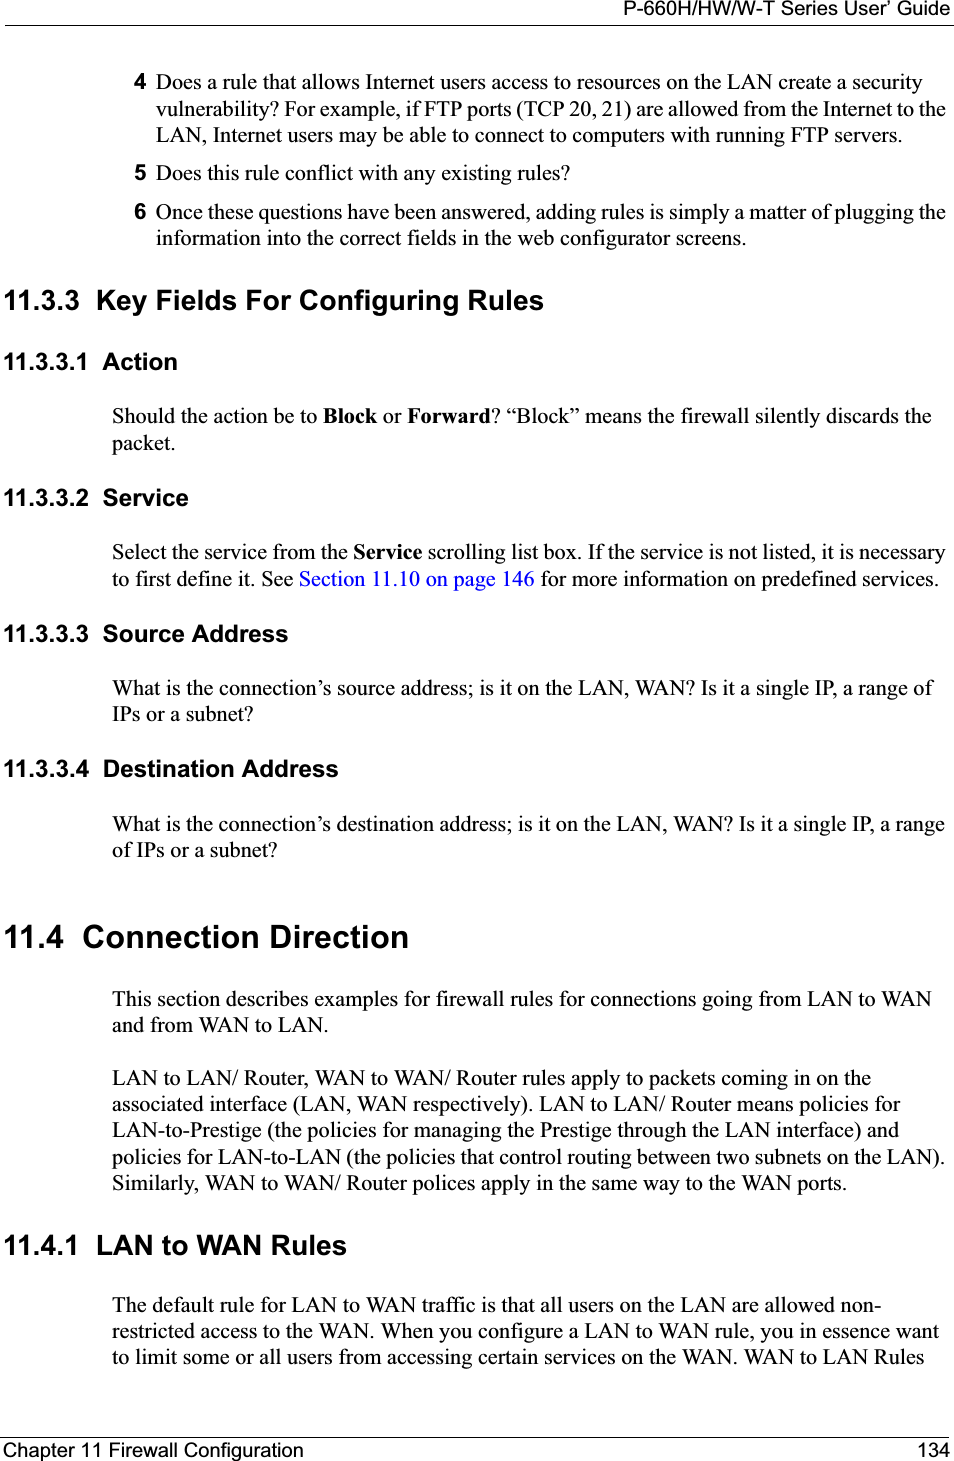 P-660H/HW/W-T Series User’ GuideChapter 11 Firewall Configuration 1344Does a rule that allows Internet users access to resources on the LAN create a security vulnerability? For example, if FTP ports (TCP 20, 21) are allowed from the Internet to the LAN, Internet users may be able to connect to computers with running FTP servers.5Does this rule conflict with any existing rules?6Once these questions have been answered, adding rules is simply a matter of plugging the information into the correct fields in the web configurator screens.11.3.3  Key Fields For Configuring Rules11.3.3.1  ActionShould the action be to Block or Forward? “Block” means the firewall silently discards the packet.11.3.3.2  ServiceSelect the service from the Service scrolling list box. If the service is not listed, it is necessary to first define it. See Section 11.10 on page 146 for more information on predefined services.11.3.3.3  Source AddressWhat is the connection’s source address; is it on the LAN, WAN? Is it a single IP, a range of IPs or a subnet?11.3.3.4  Destination AddressWhat is the connection’s destination address; is it on the LAN, WAN? Is it a single IP, a range of IPs or a subnet?11.4  Connection DirectionThis section describes examples for firewall rules for connections going from LAN to WAN and from WAN to LAN. LAN to LAN/ Router, WAN to WAN/ Router rules apply to packets coming in on the associated interface (LAN, WAN respectively). LAN to LAN/ Router means policies for LAN-to-Prestige (the policies for managing the Prestige through the LAN interface) and policies for LAN-to-LAN (the policies that control routing between two subnets on the LAN). Similarly, WAN to WAN/ Router polices apply in the same way to the WAN ports.11.4.1  LAN to WAN RulesThe default rule for LAN to WAN traffic is that all users on the LAN are allowed non-restricted access to the WAN. When you configure a LAN to WAN rule, you in essence want to limit some or all users from accessing certain services on the WAN. WAN to LAN Rules